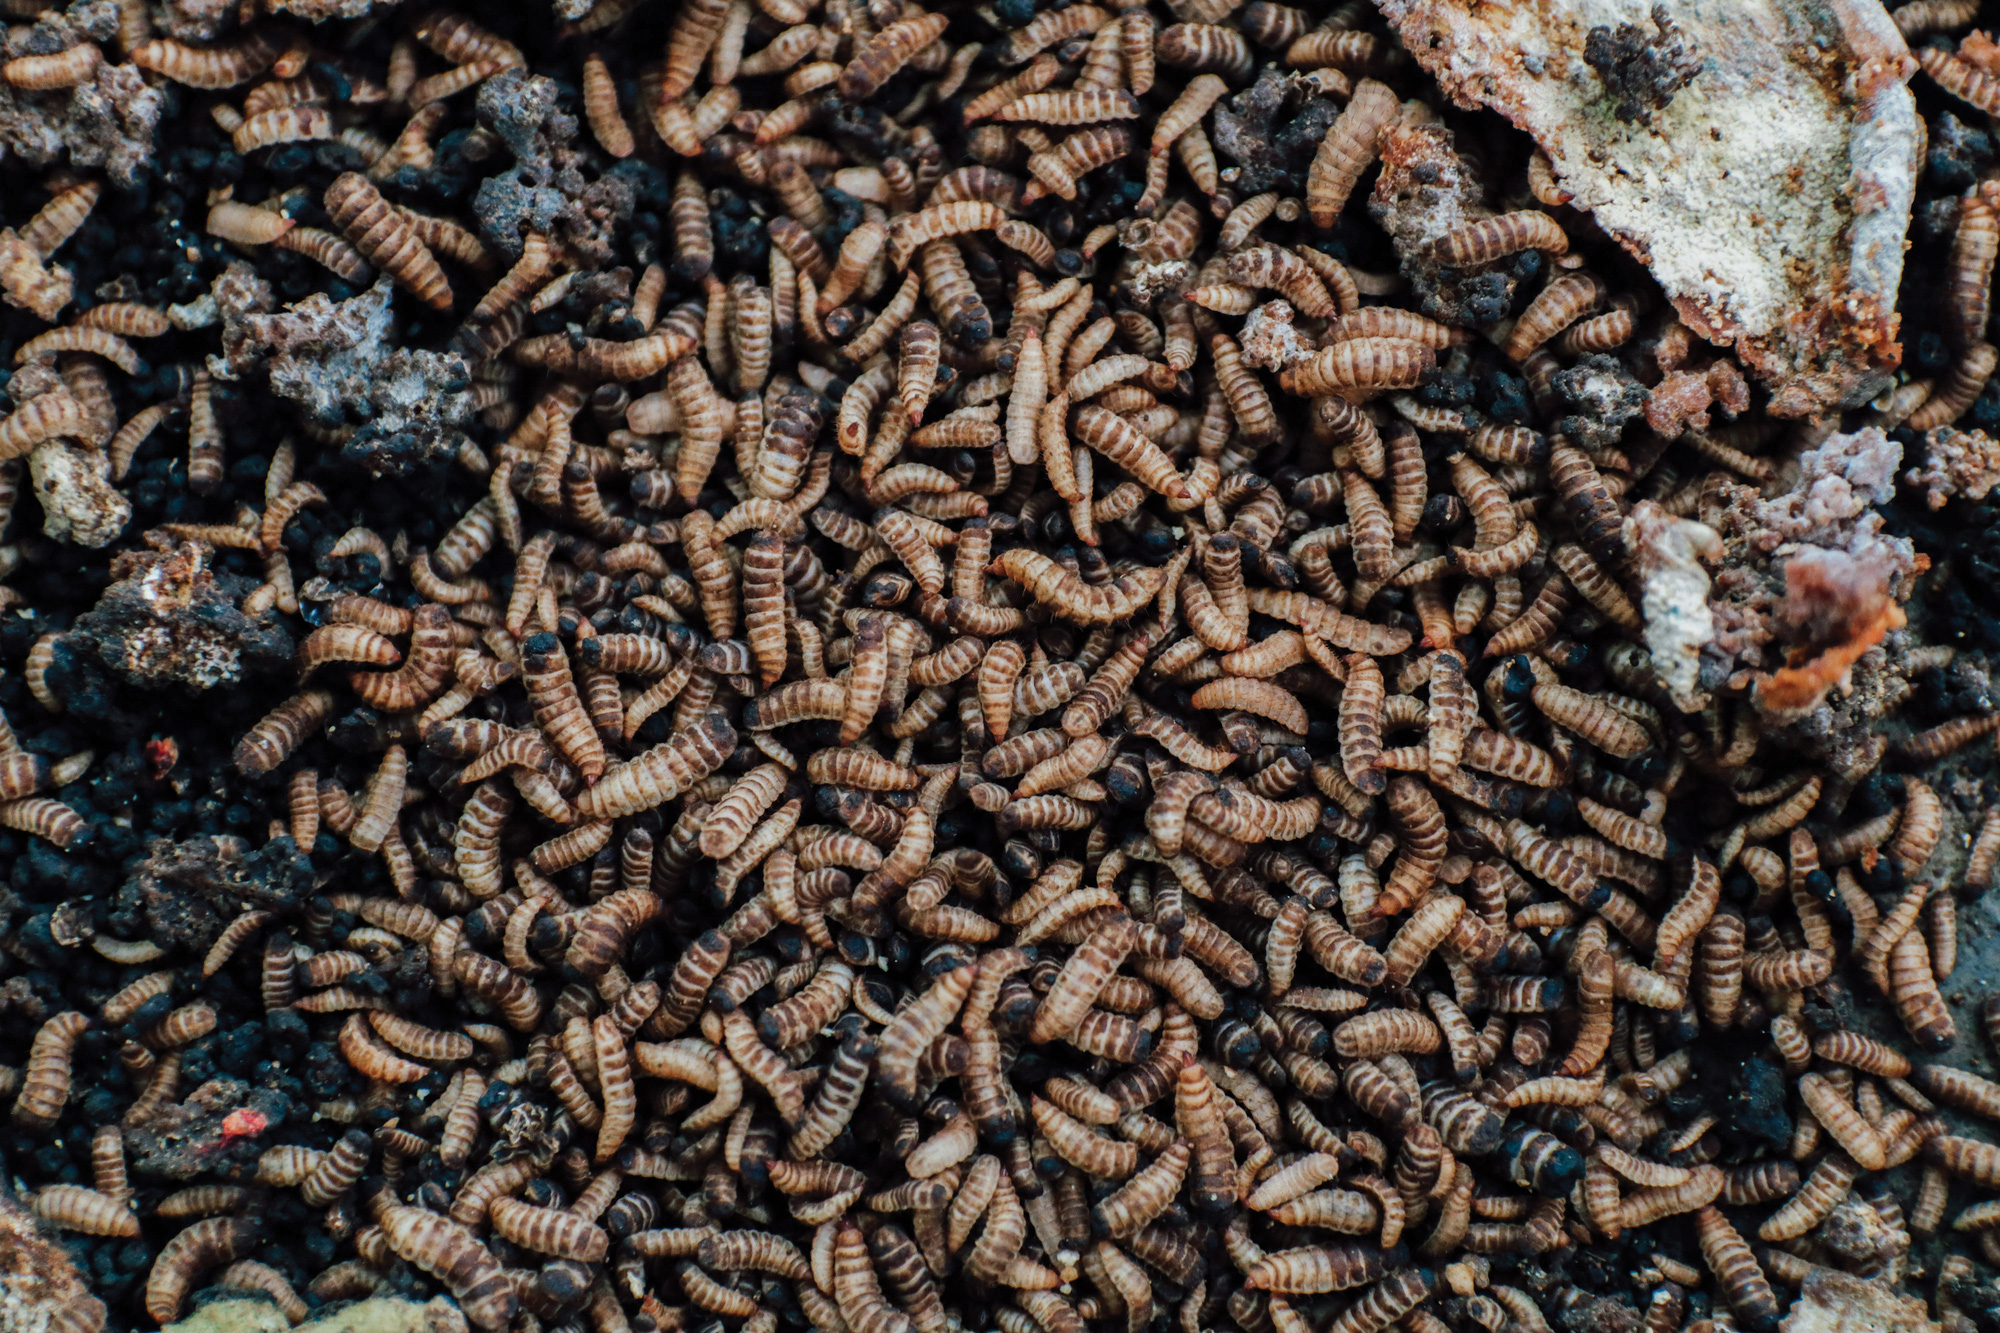 Larvae of black soldier flies hatched in Hanh Phuc's farms.